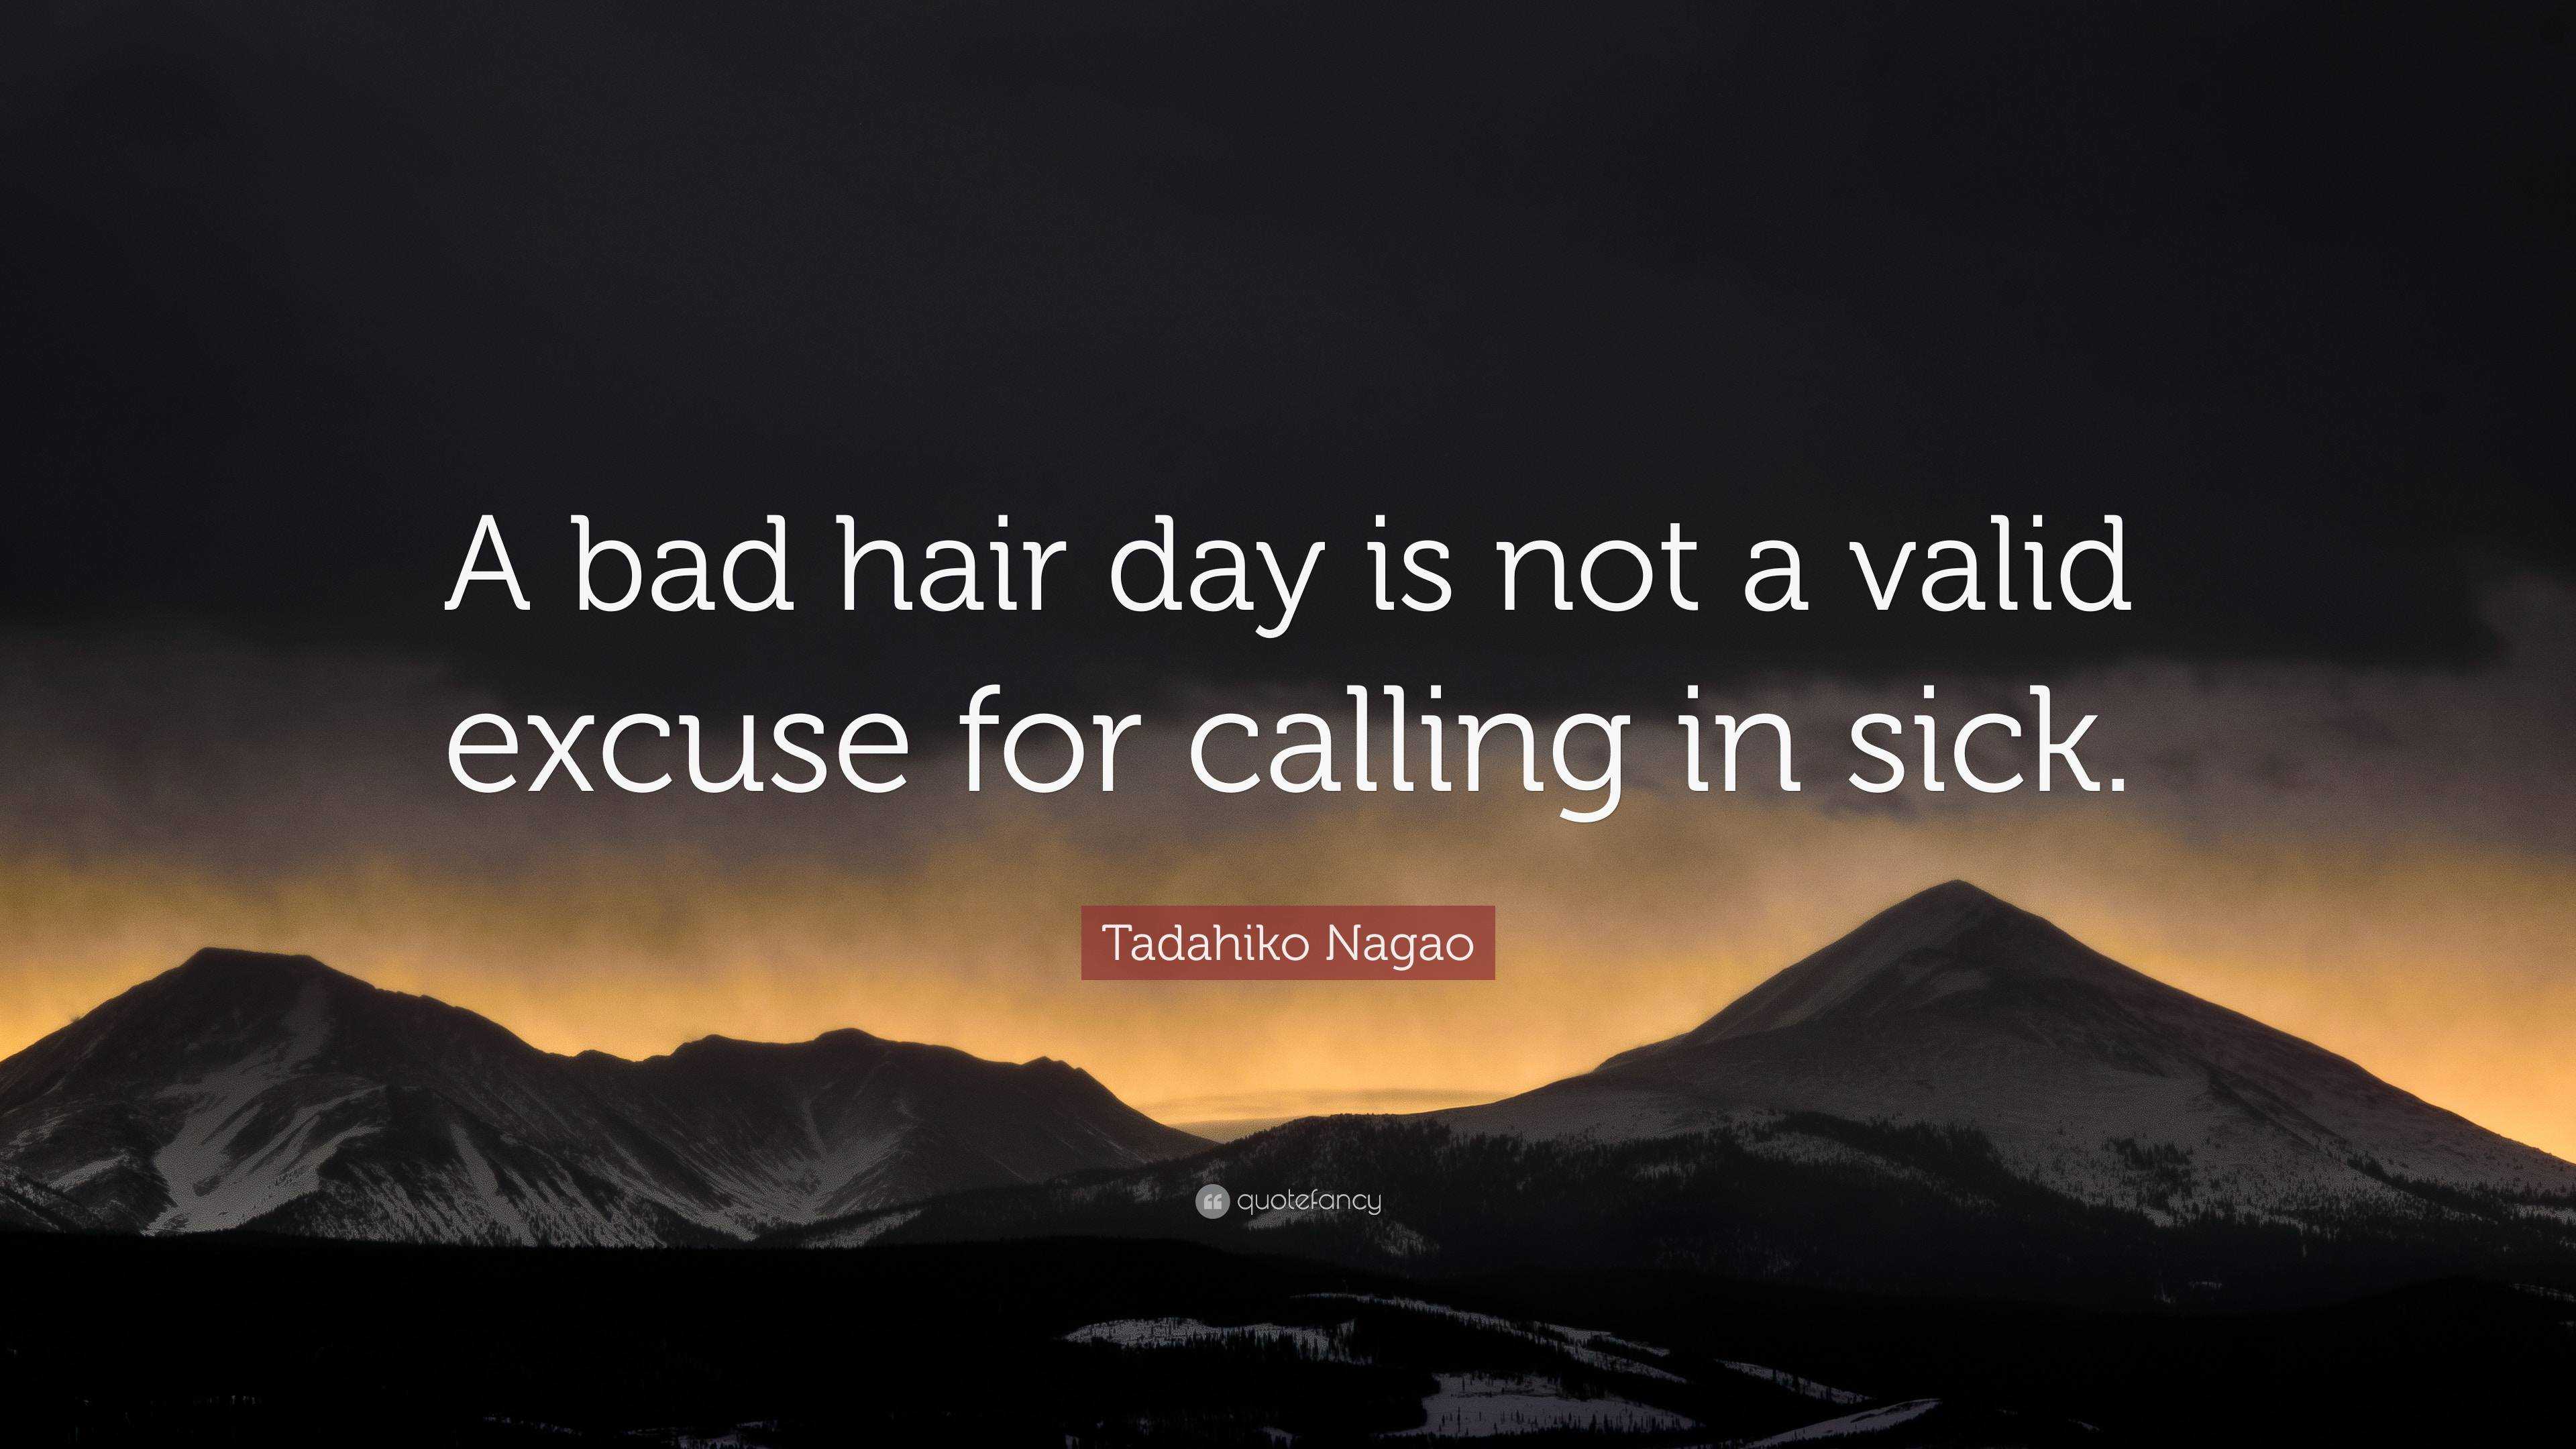 Yeah because its Saturday of course wishing you all a great hair  Saturday night salonthree quote funny goodhair hair funny   Kapsalons Schoonheidssalon